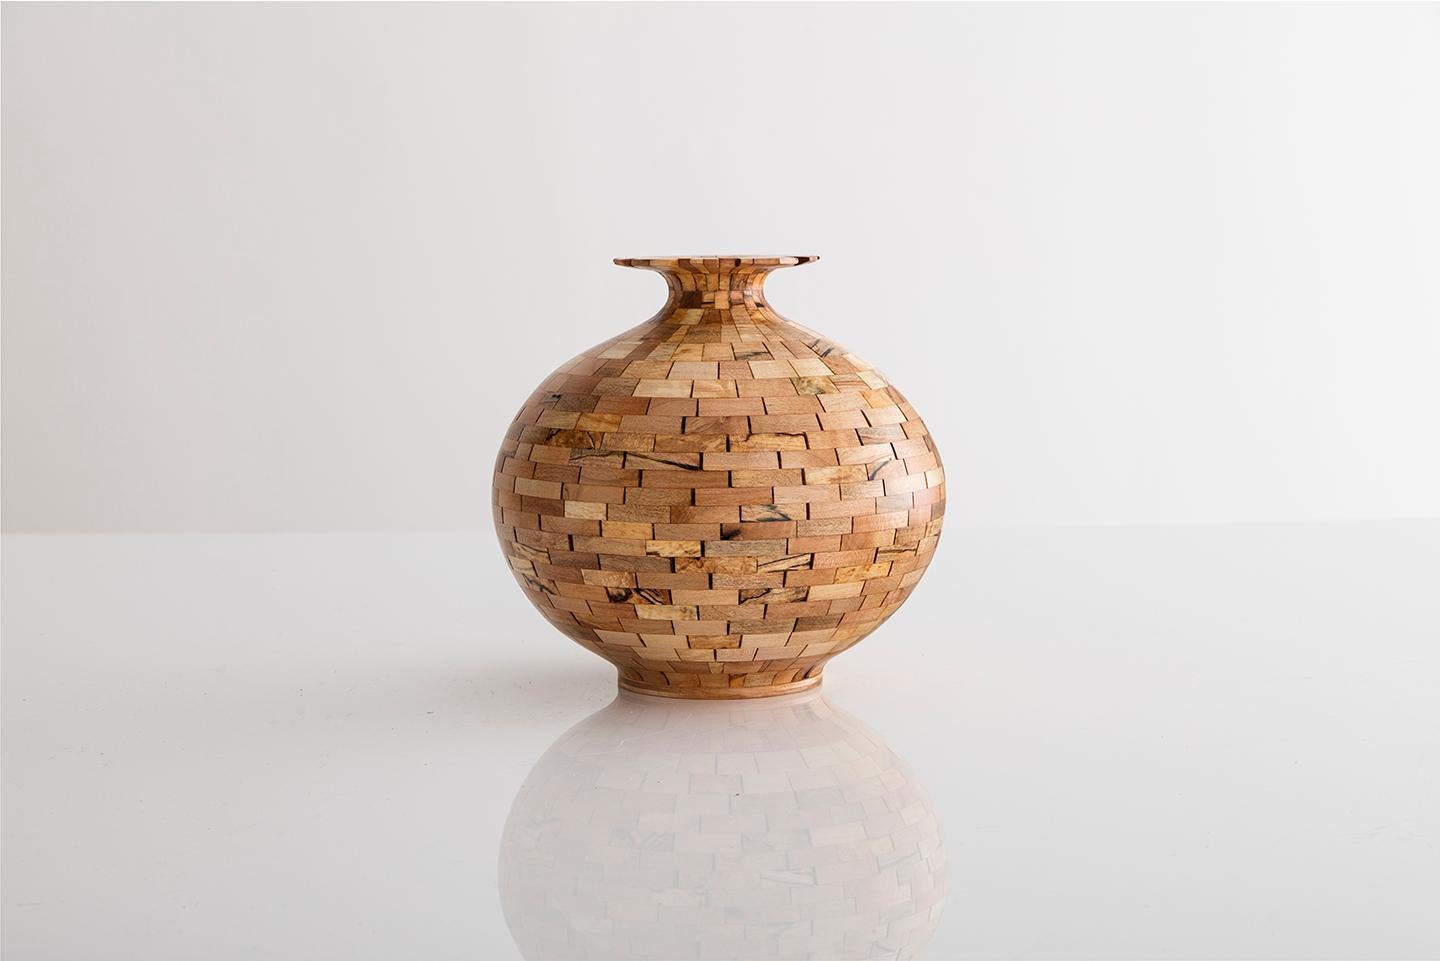 Part of Richard Haining's STACKED Collection, this vase was made using reclaimed California redwood salvaged from a decommissioned NYC water tower. The wood's natural coloring shows off tones ranging from pink and deep reds to almost black in color.